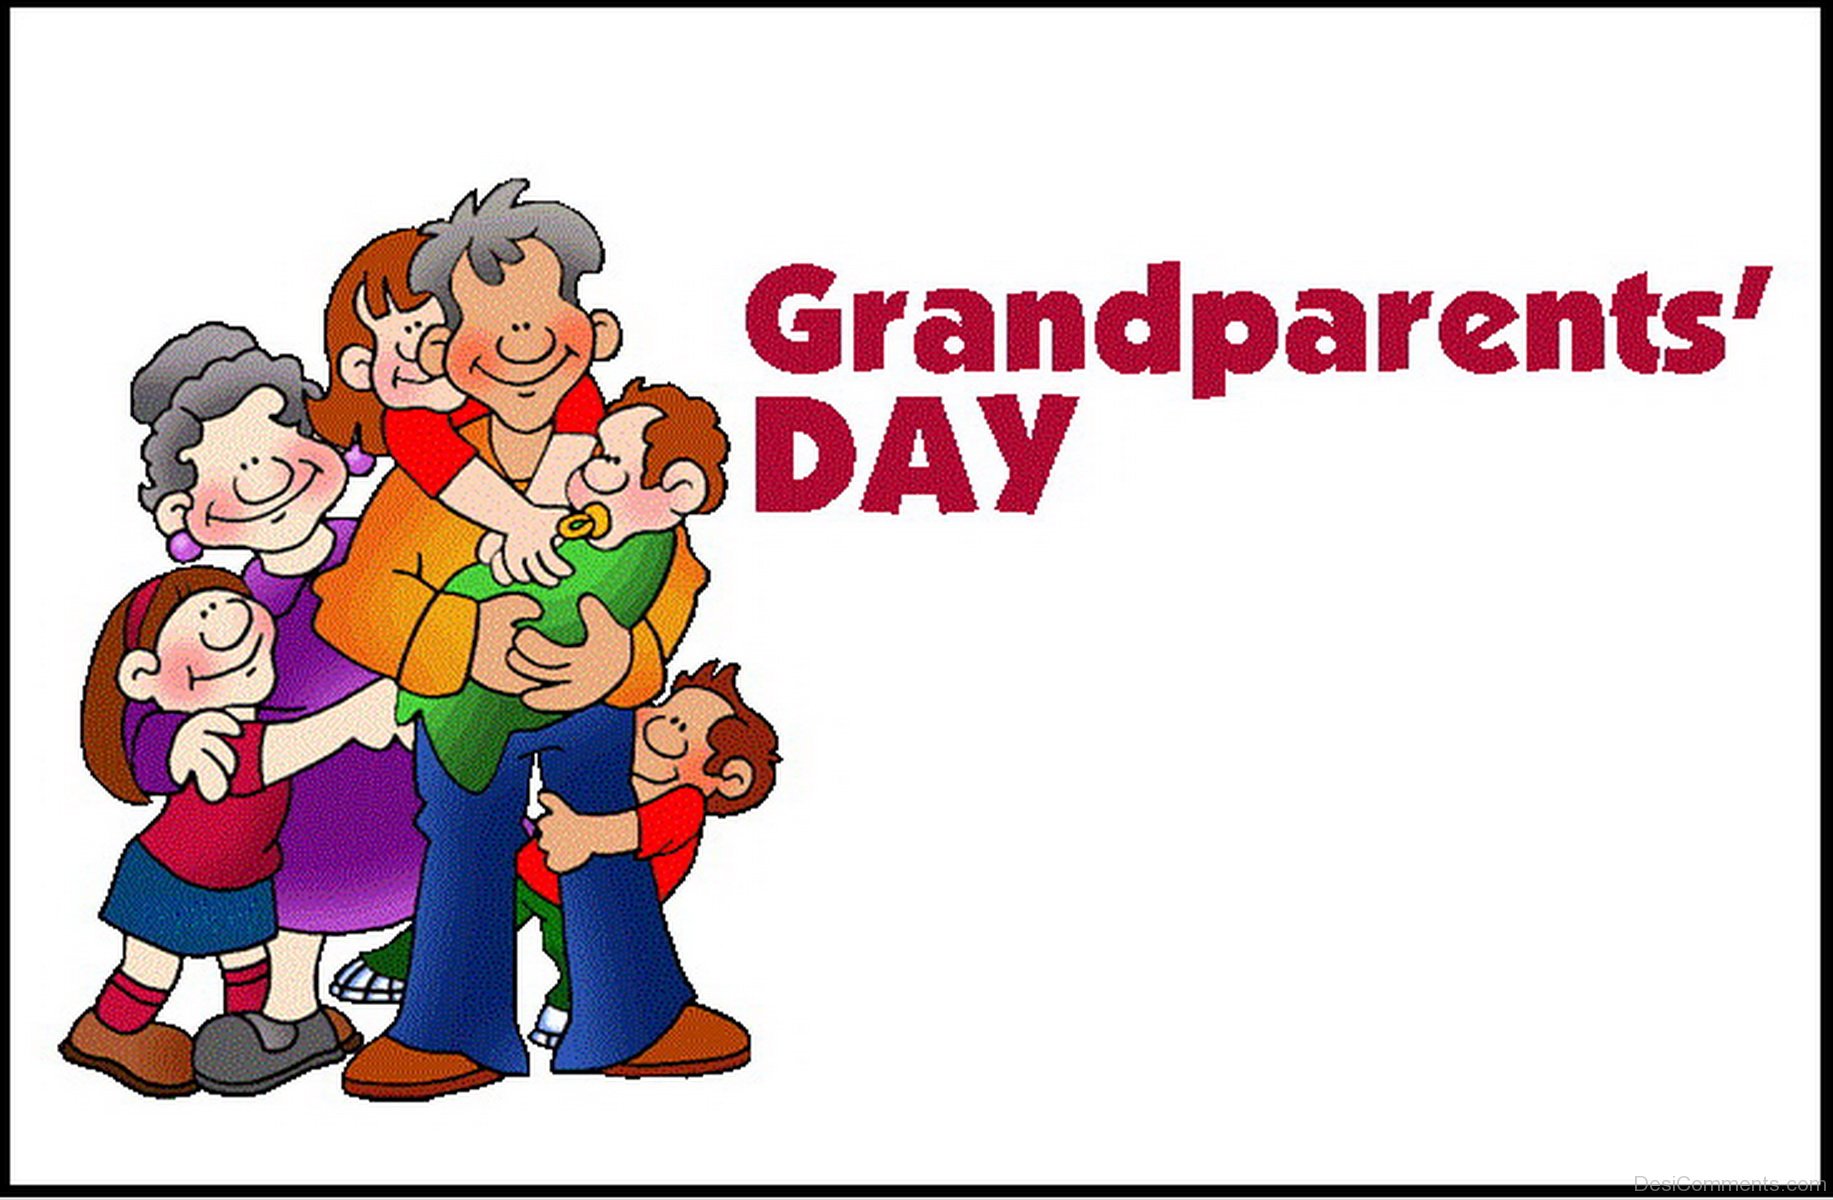 Happy GrandParents Day To My Grand Parents - DesiComments.com